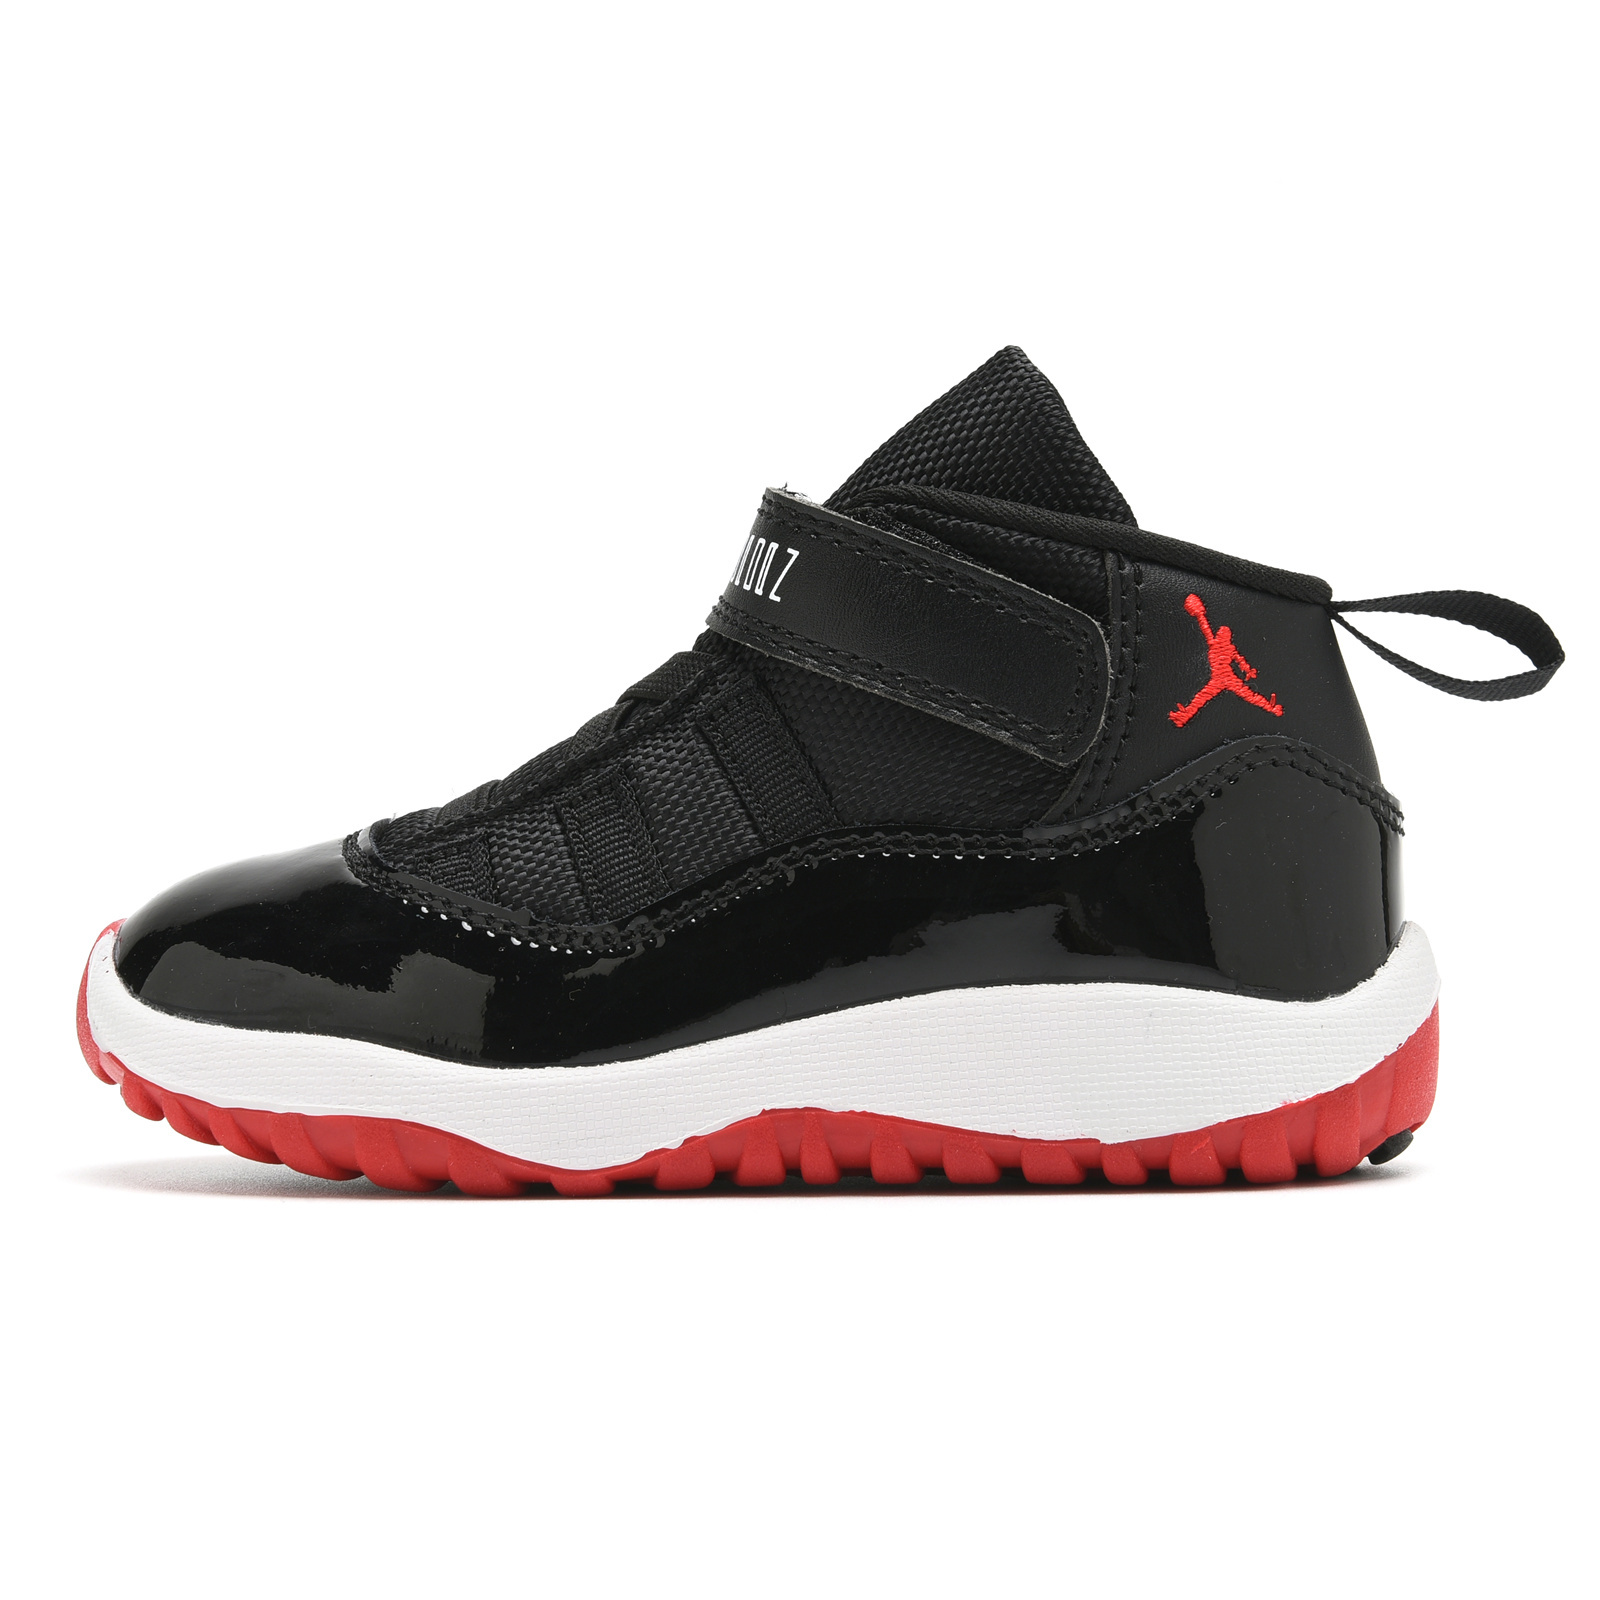 Youth Running Weapon Air Jordan 11 Black/Red Shoes 030